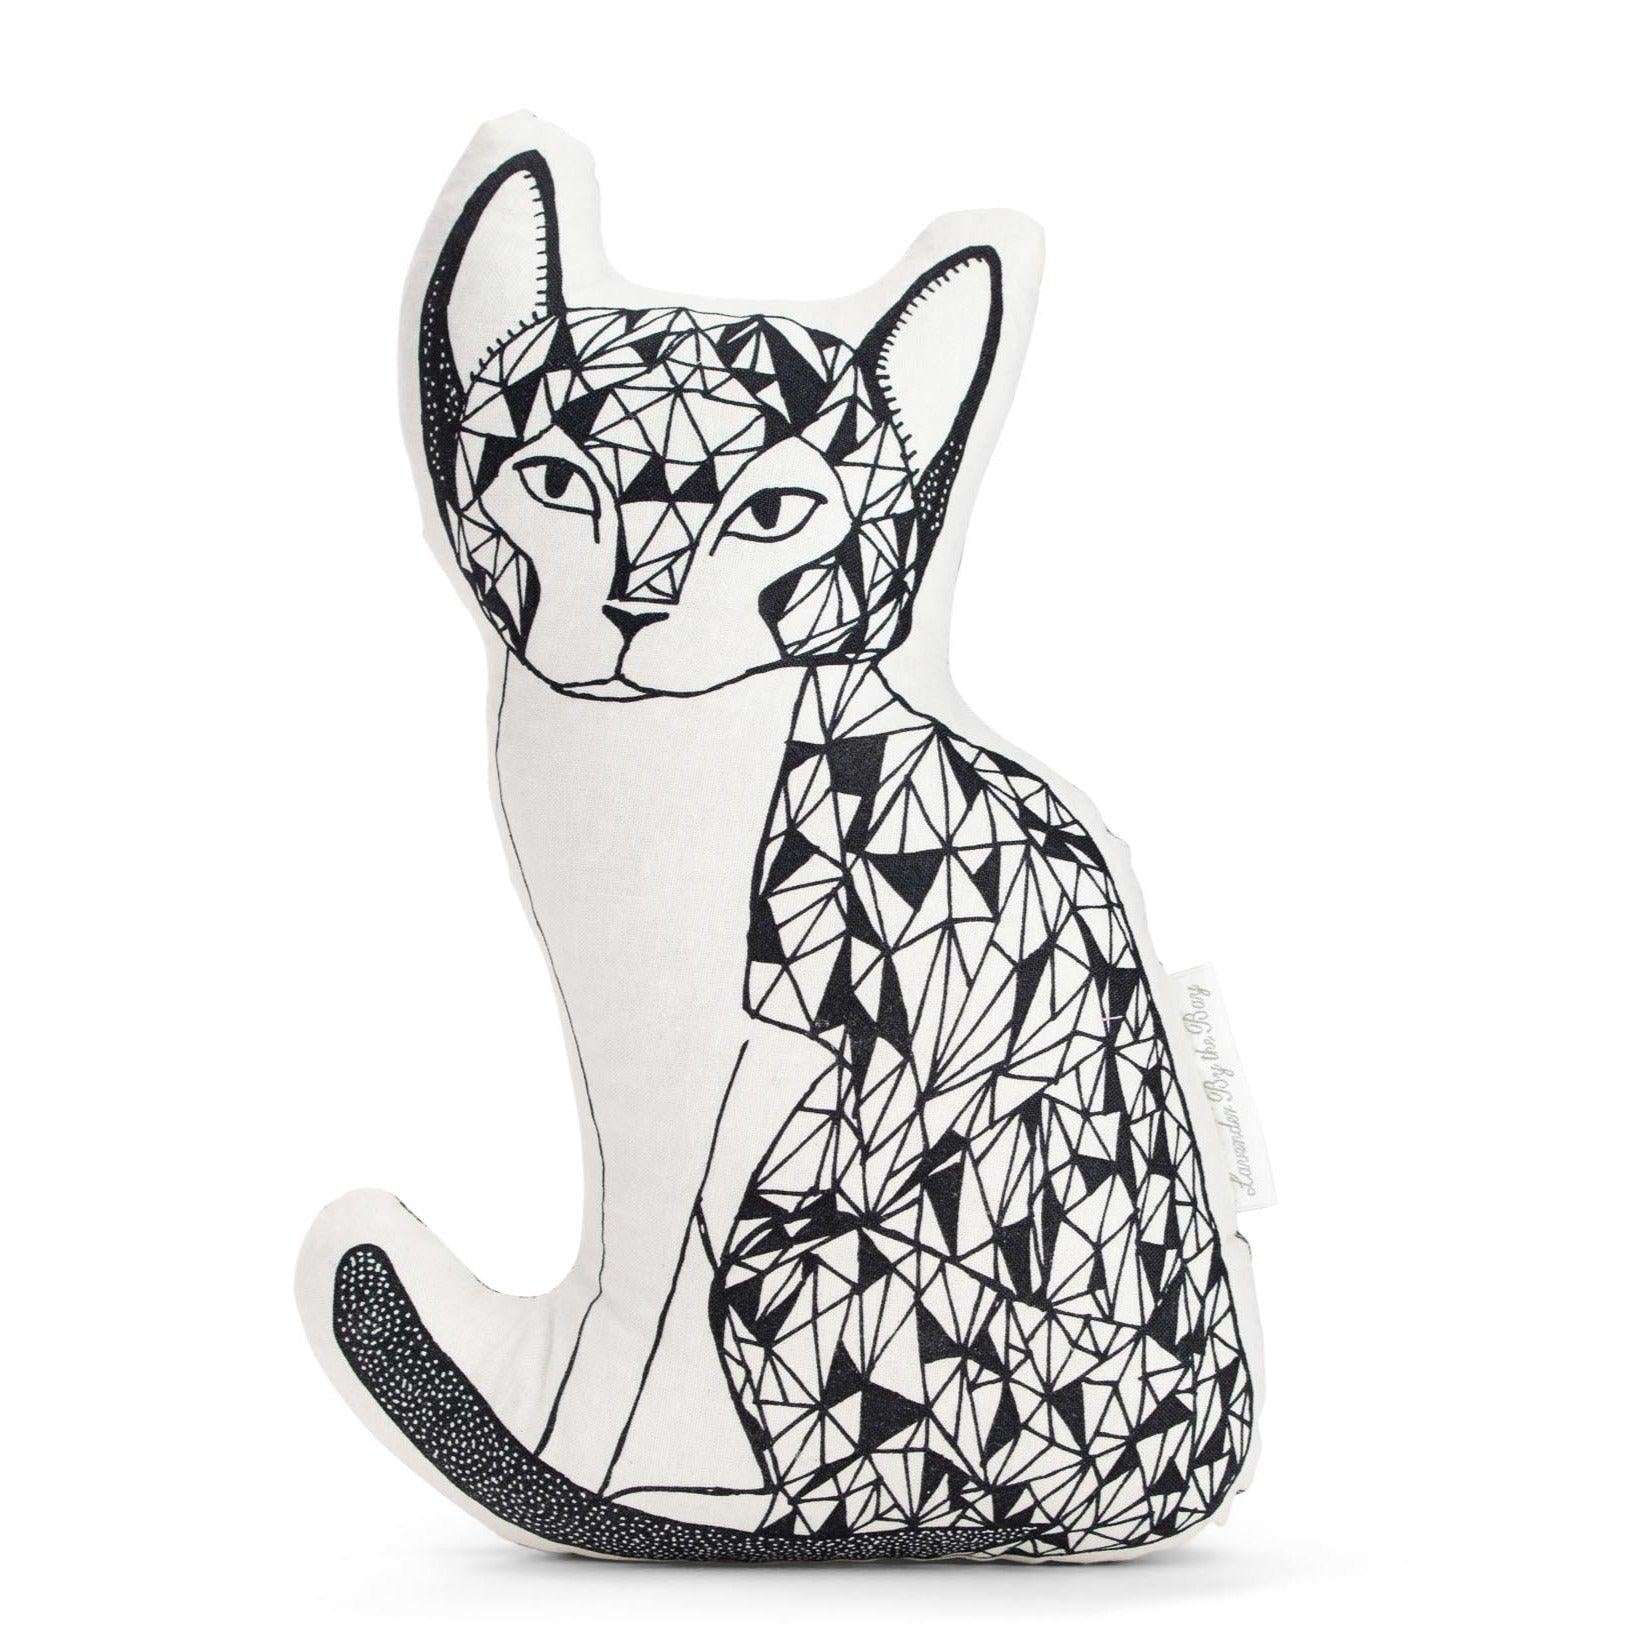 Large cat pillow with geometric pattern